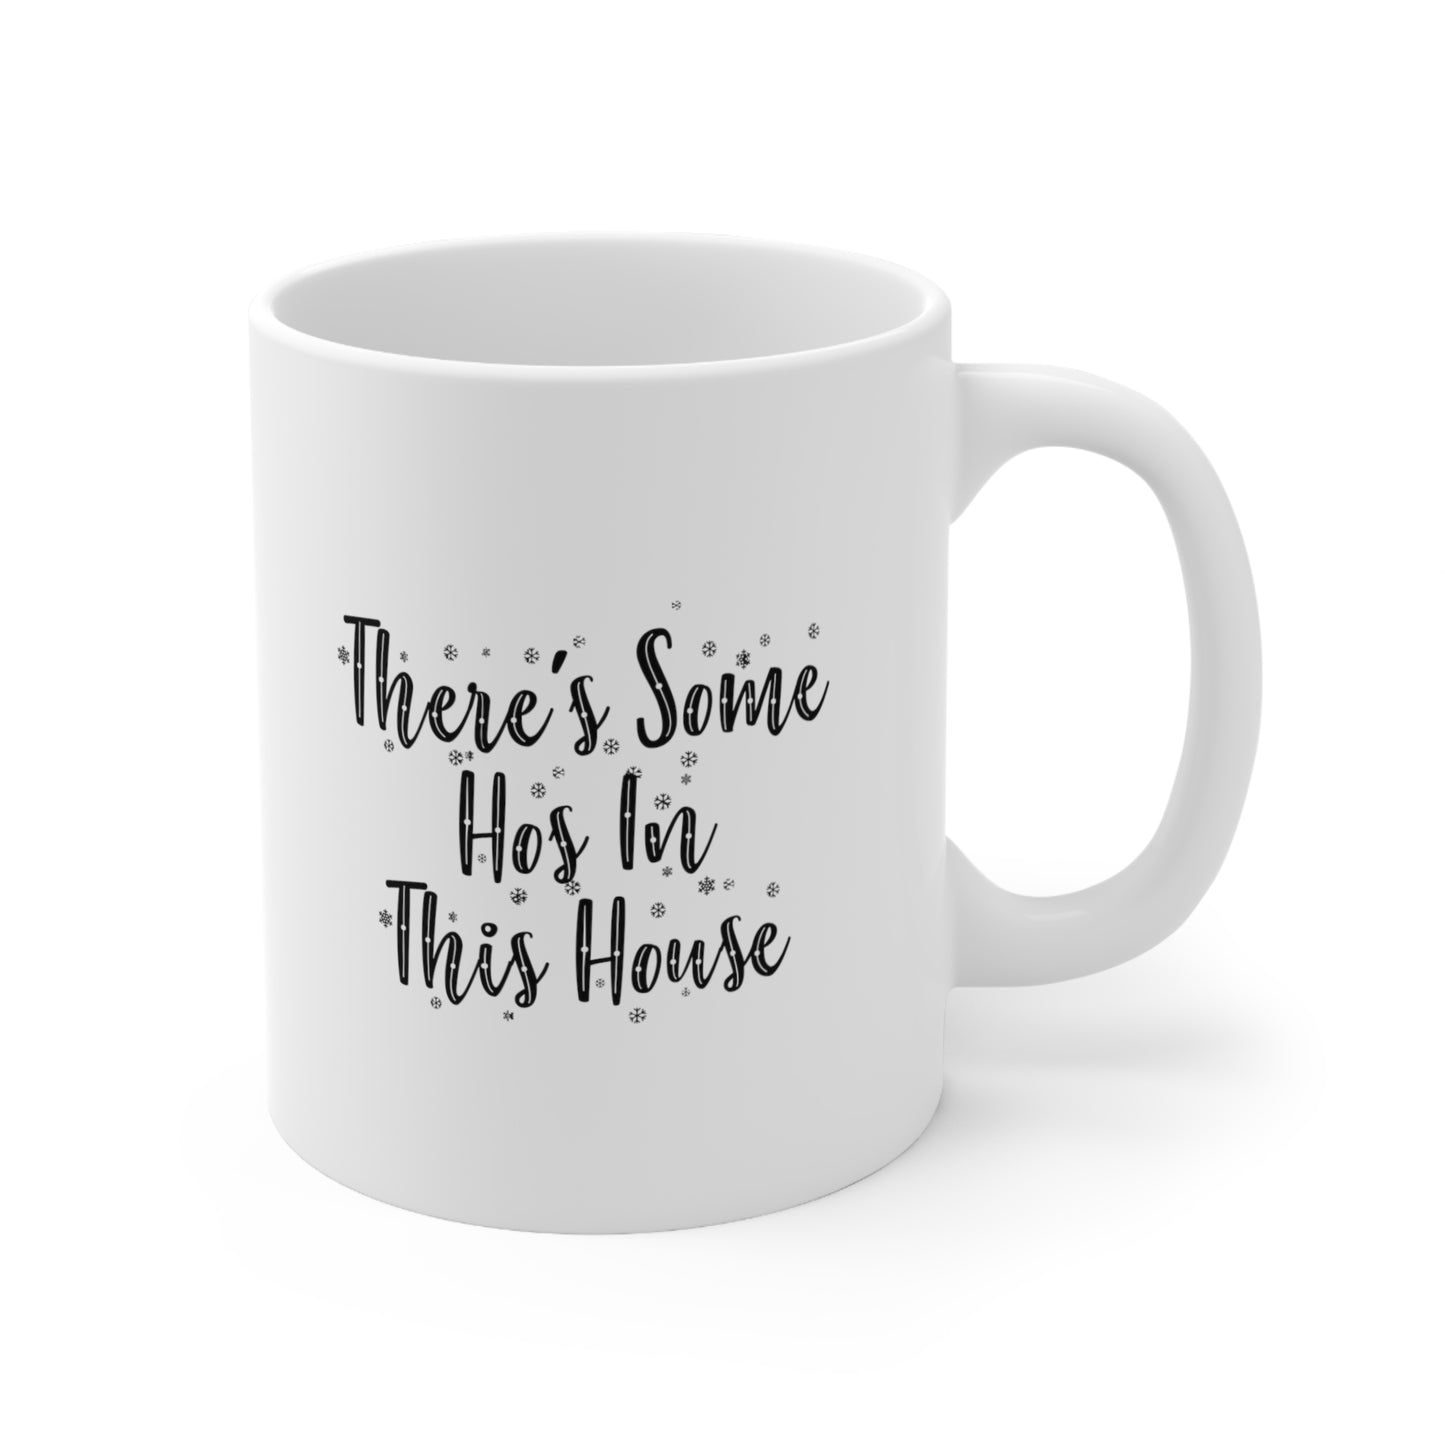 There's some hos in this house Coffee Mug 11oz